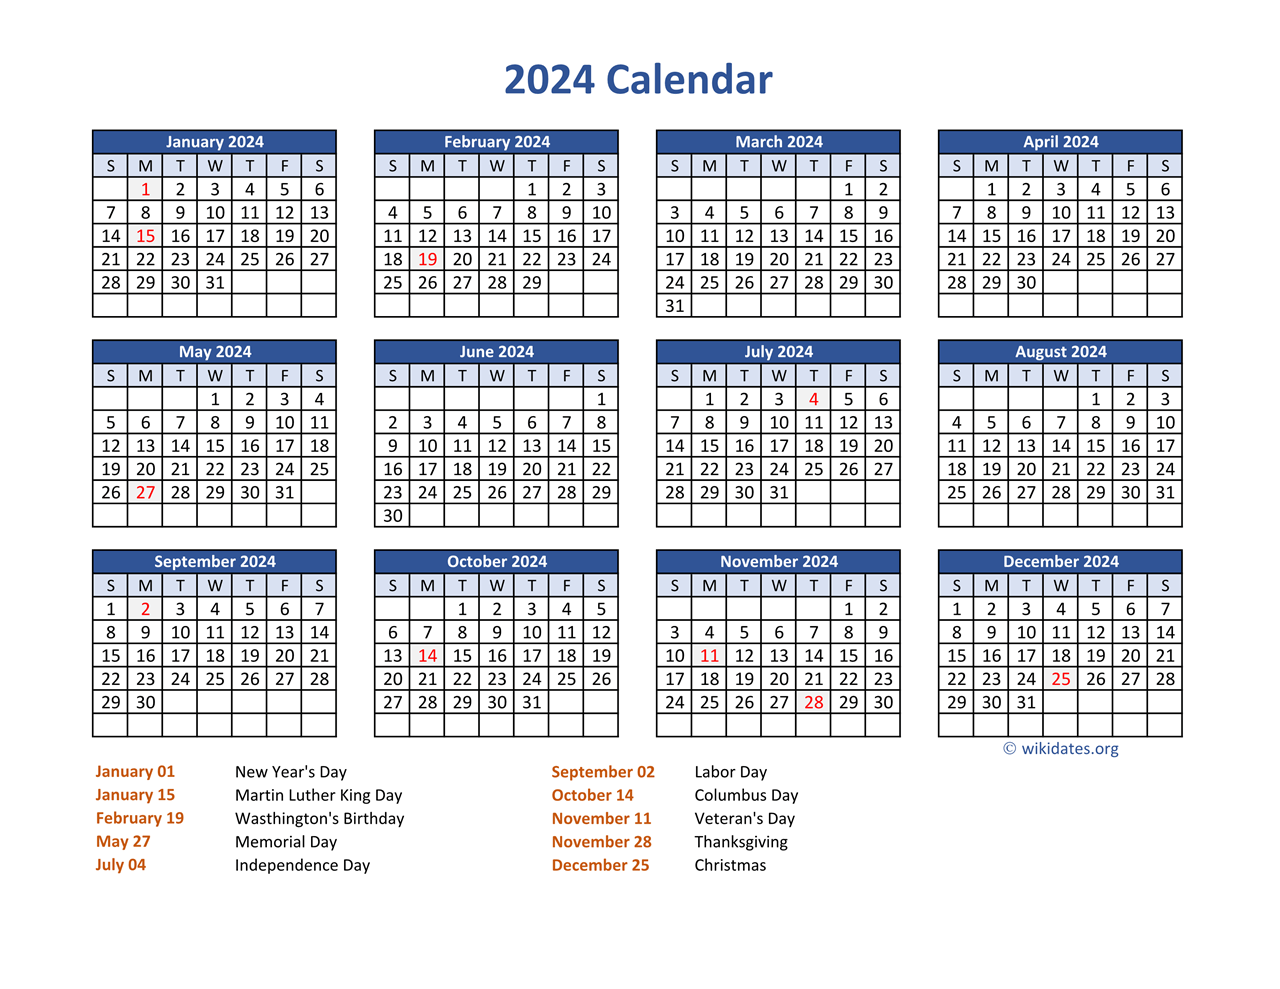 Pdf Calendar 2024 With Federal Holidays | Wikidates for 2024 Year Calendar With Holidays Printable